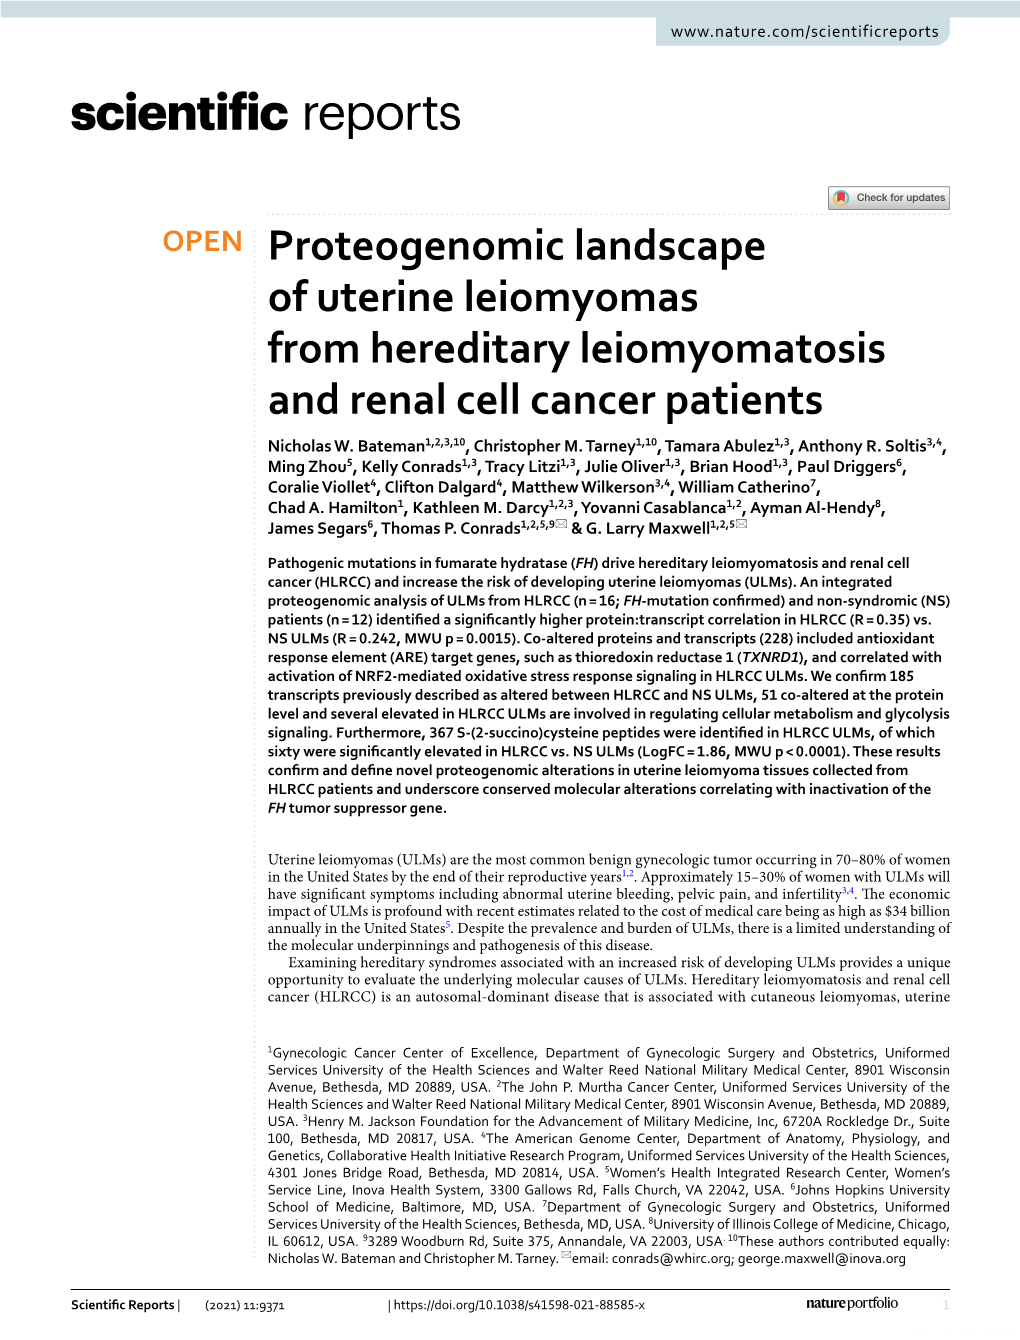 Proteogenomic Landscape of Uterine Leiomyomas from Hereditary Leiomyomatosis and Renal Cell Cancer Patients Nicholas W